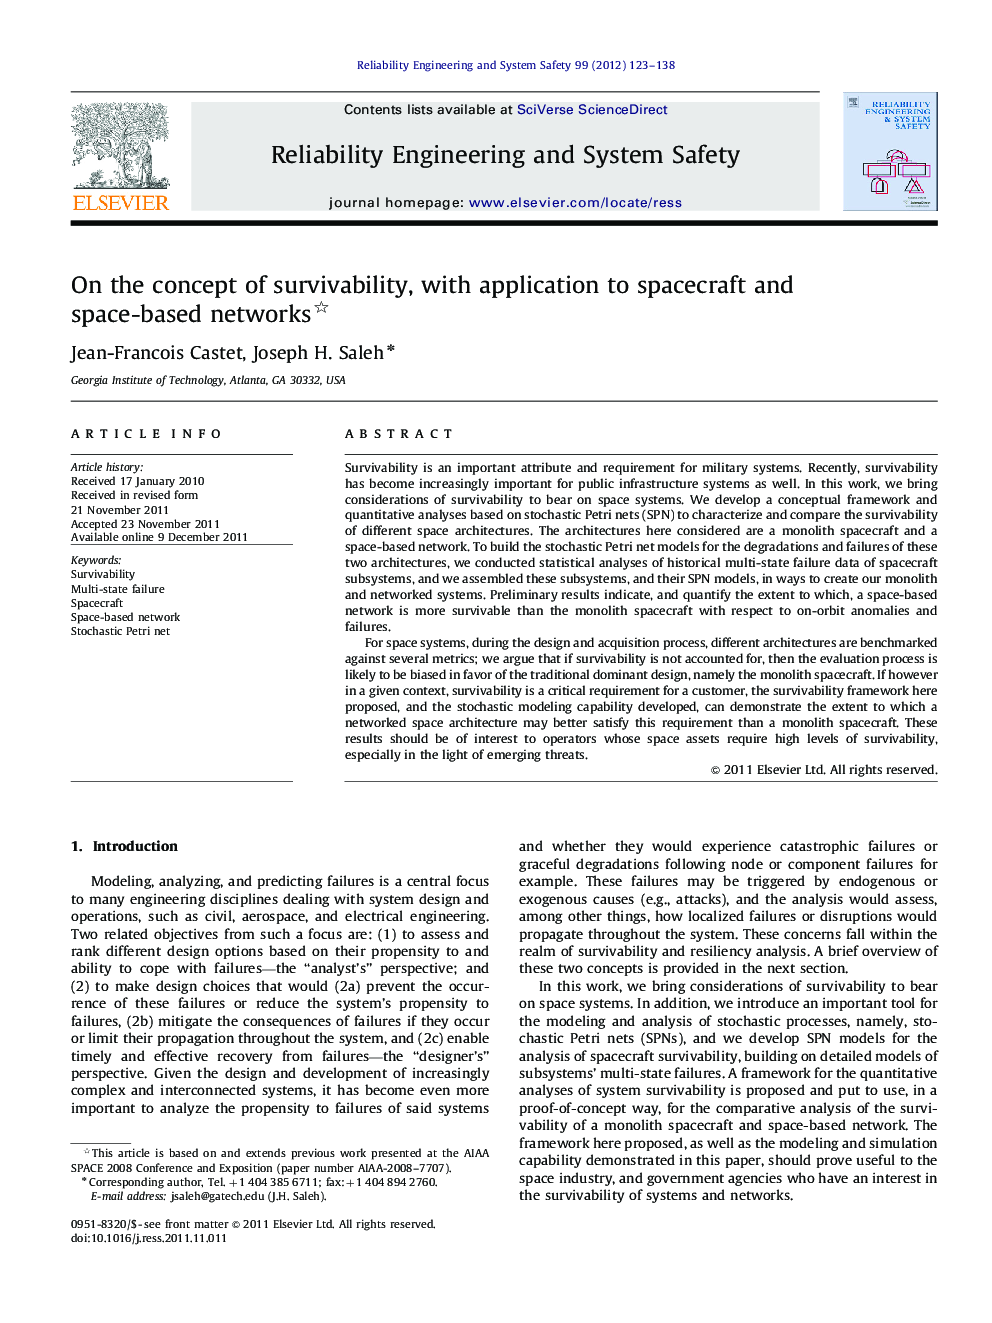 On the concept of survivability, with application to spacecraft and space-based networks 